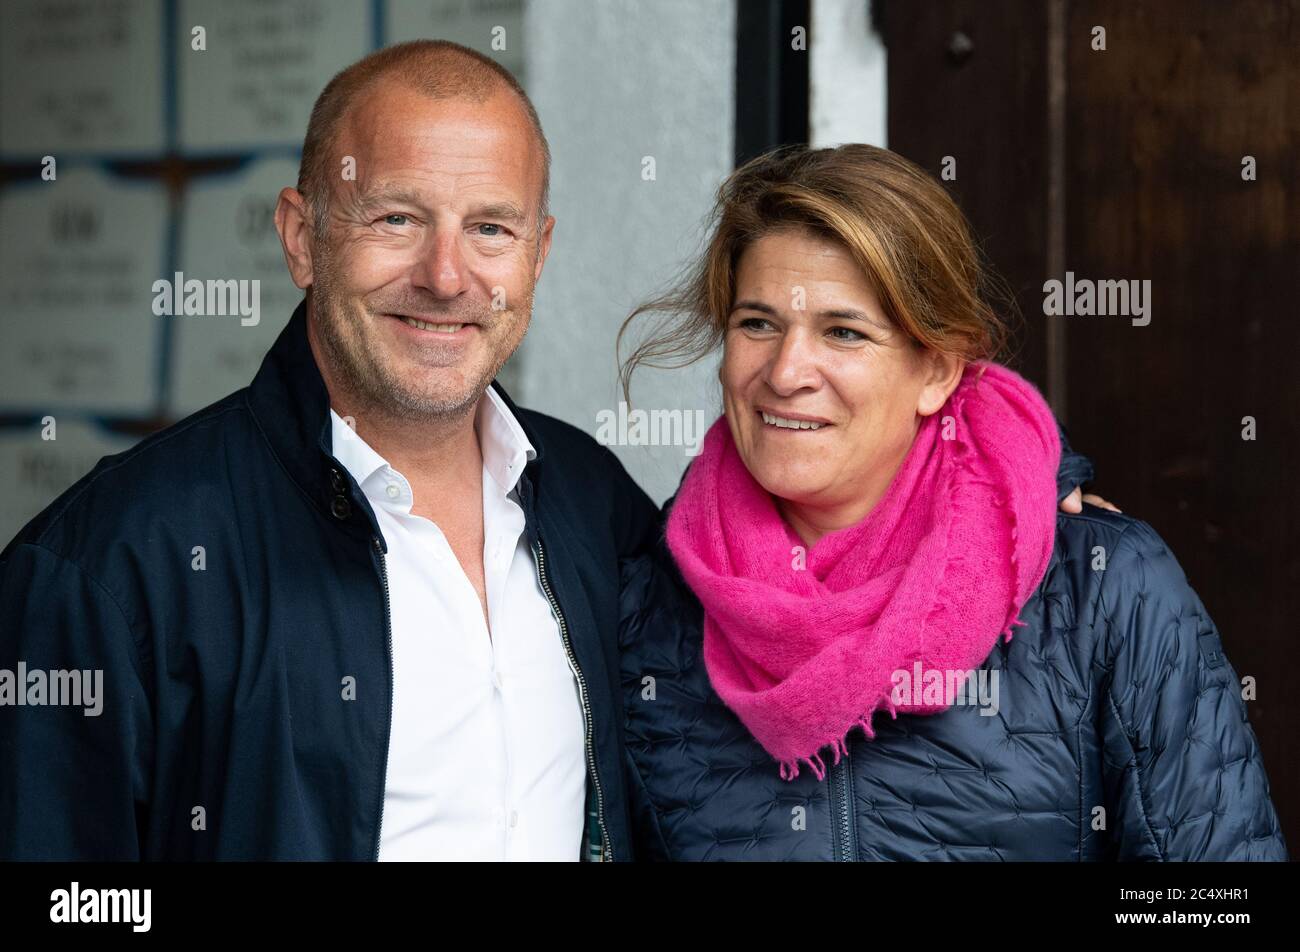 29 June 2020, Bavaria, Weßling: Heino Ferch, actor, and his wife Marie-Jeanette recorded at a press event at Circus Krone Farm. Photo: Sven Hoppe/dpa Stock Photo